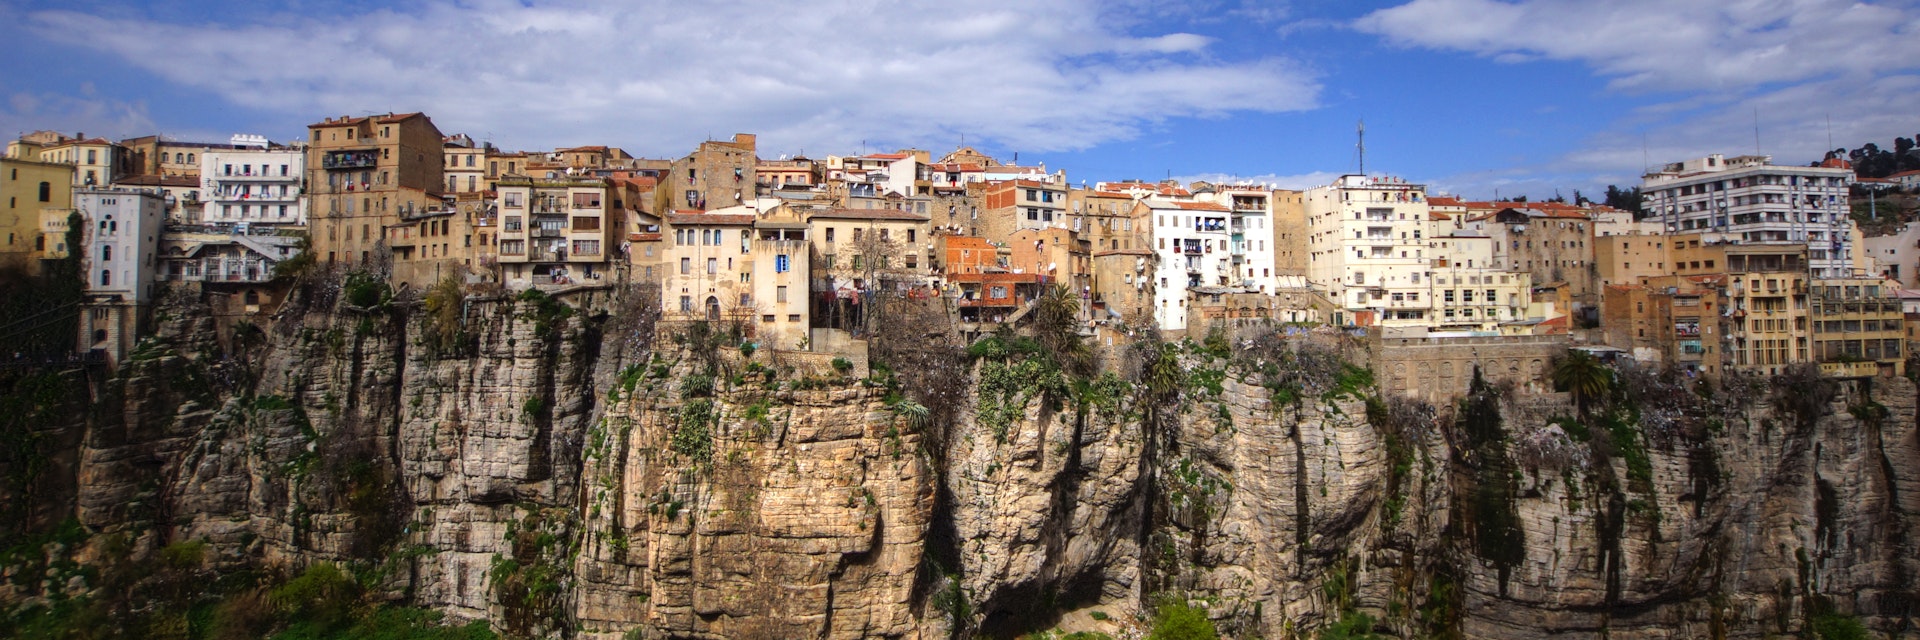 Constantine historic casbah on gorge cliff